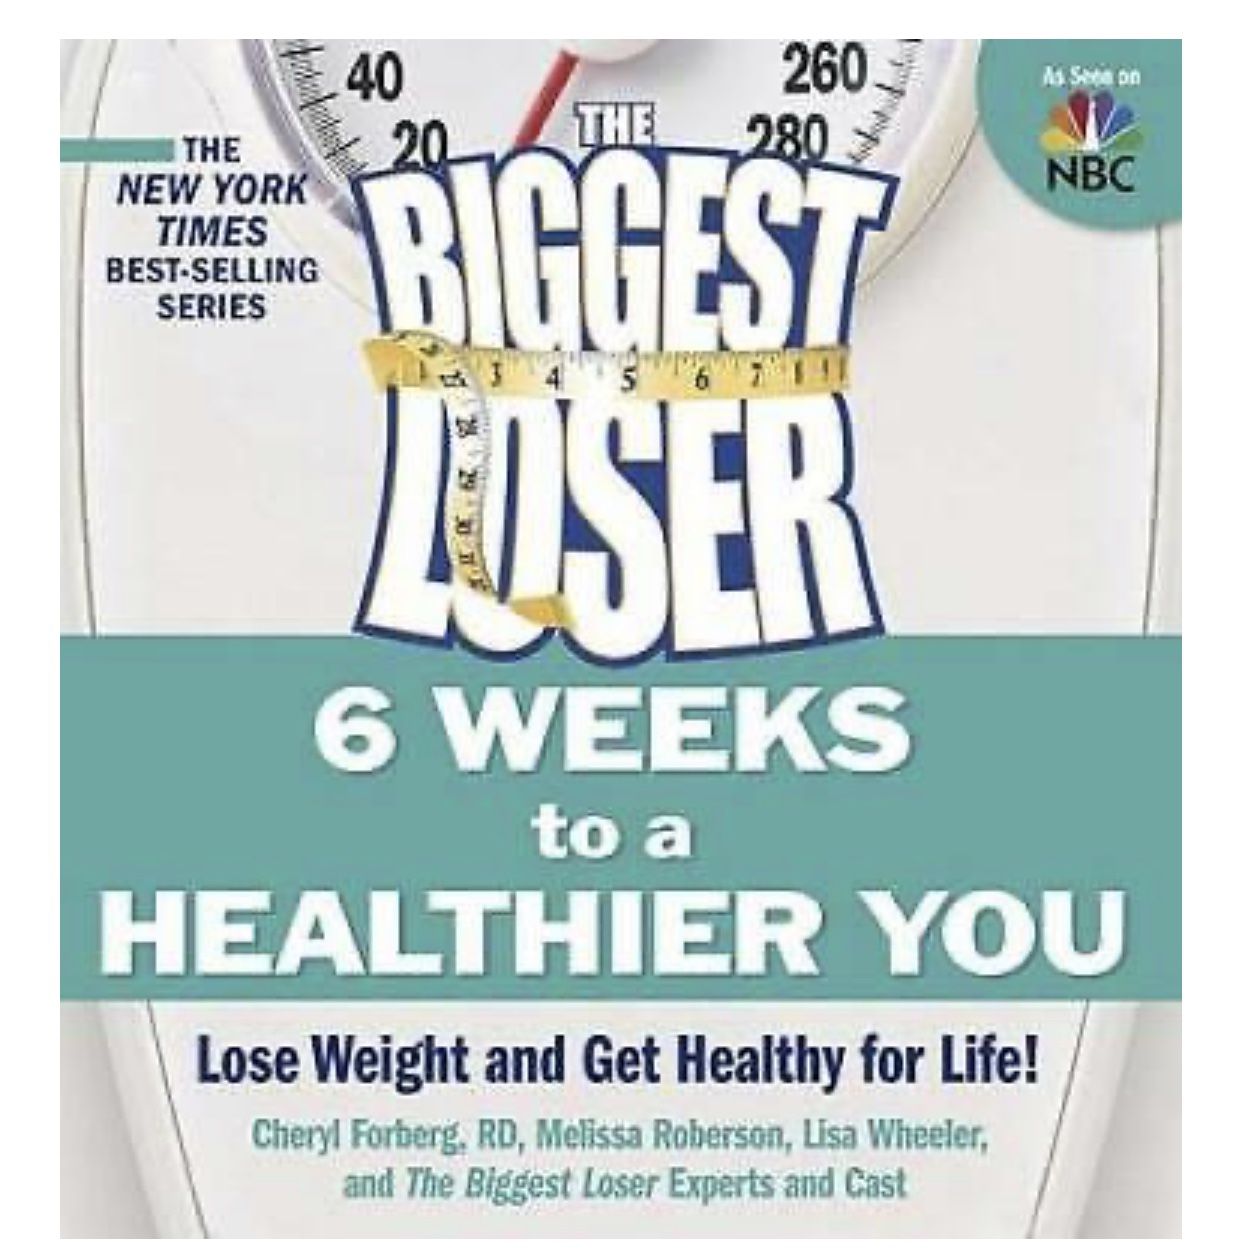 The Biggest Loser: 6 Weeks to a Healthier You: Lose Weight and Get Health